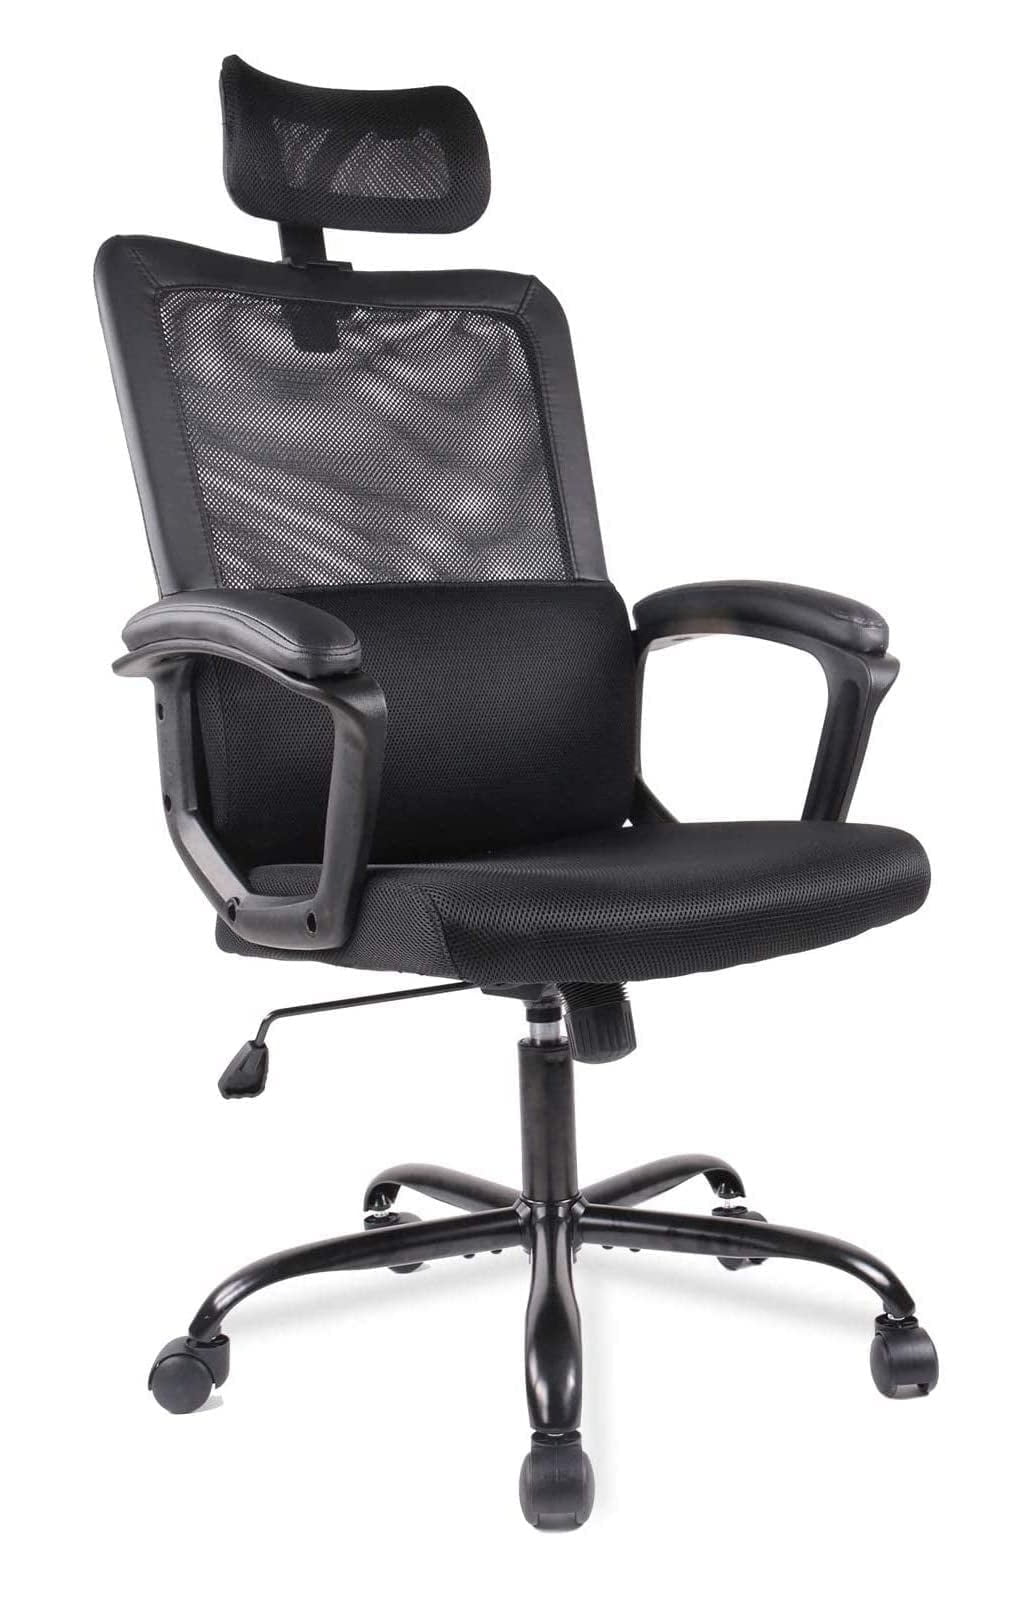 Black High-Back Swivel Mesh Chair Padded Desk Chair With Arms & Head Support，Max Capacity 286Ibs Ergonomic Office Computer Chair 